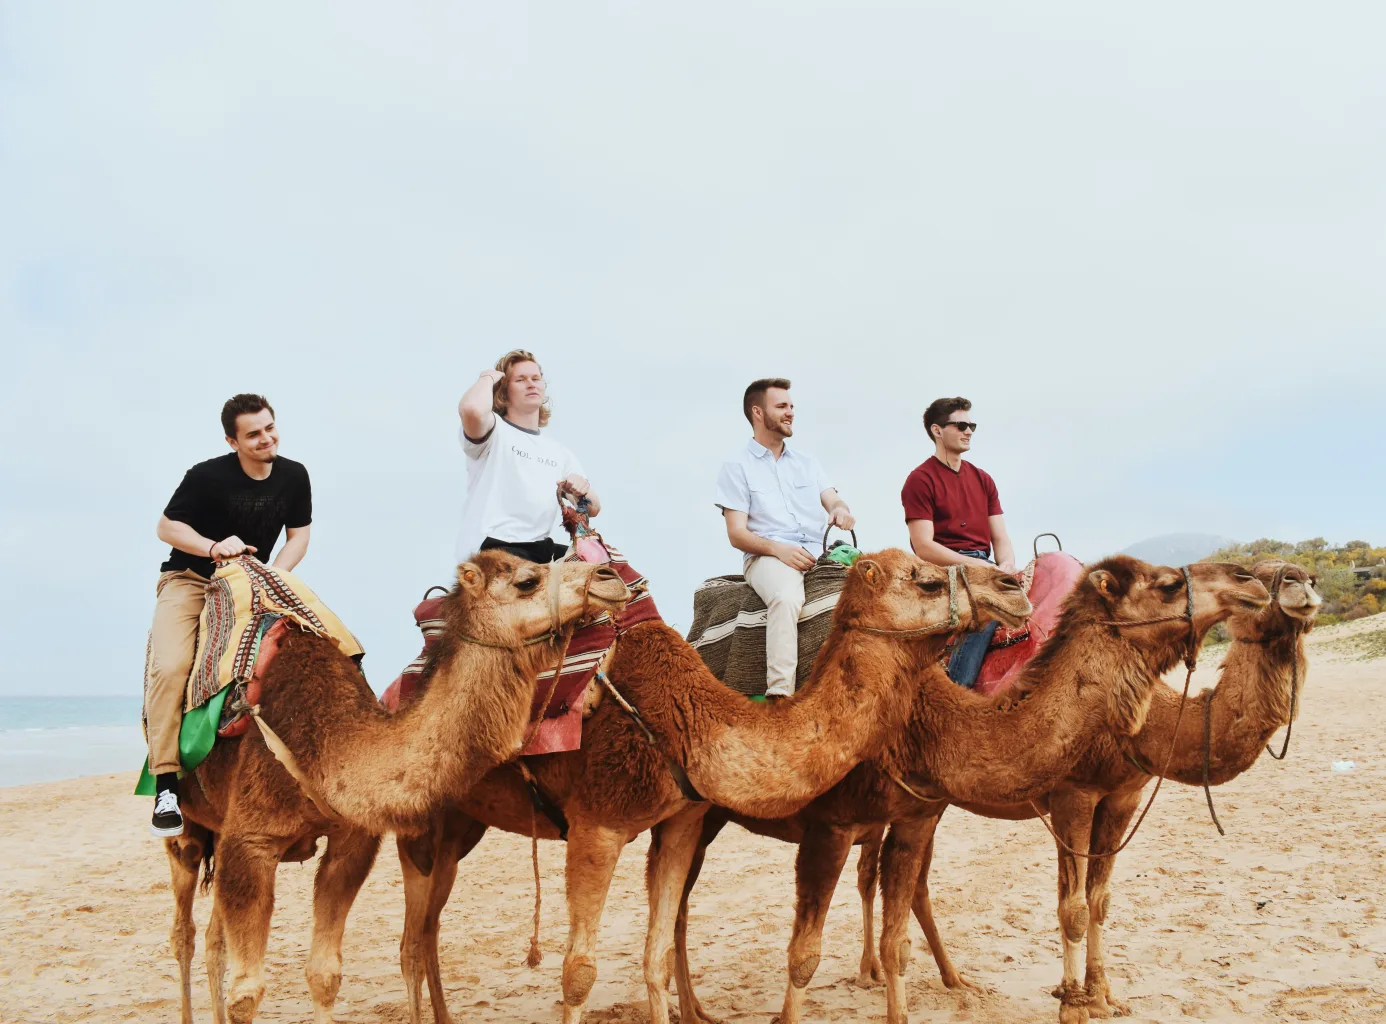 People on camels.